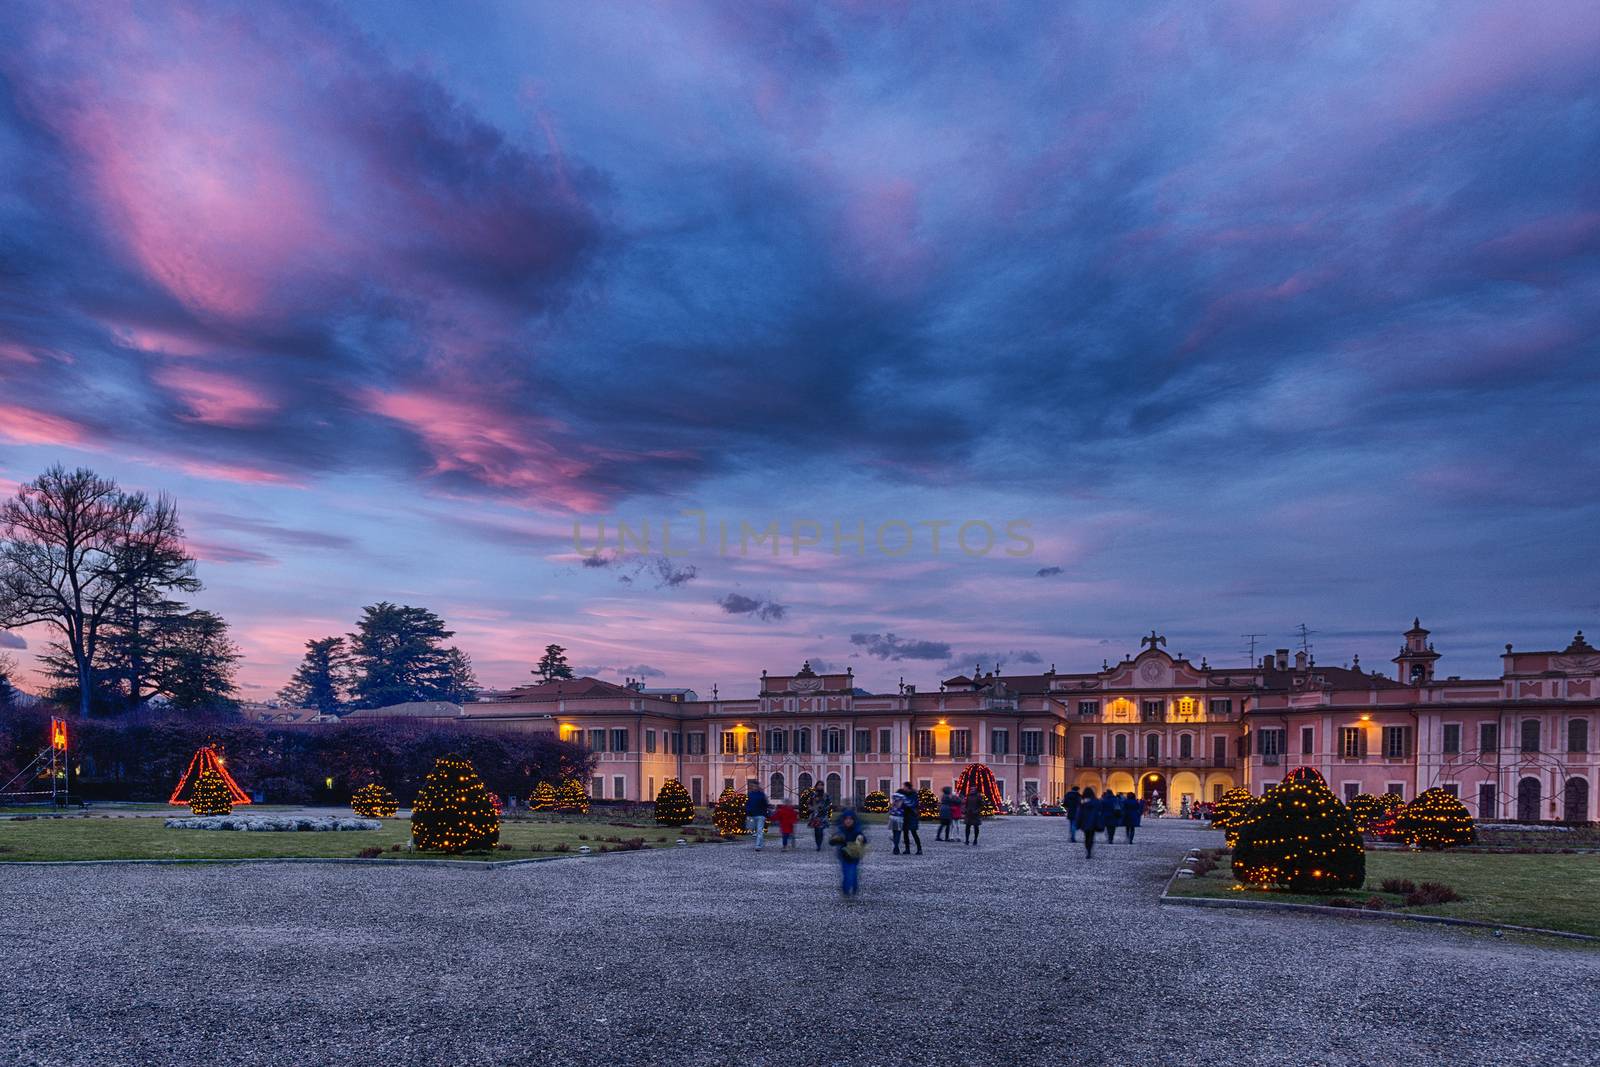 Christmas lights in the public gardens of Estense Palace, Varese